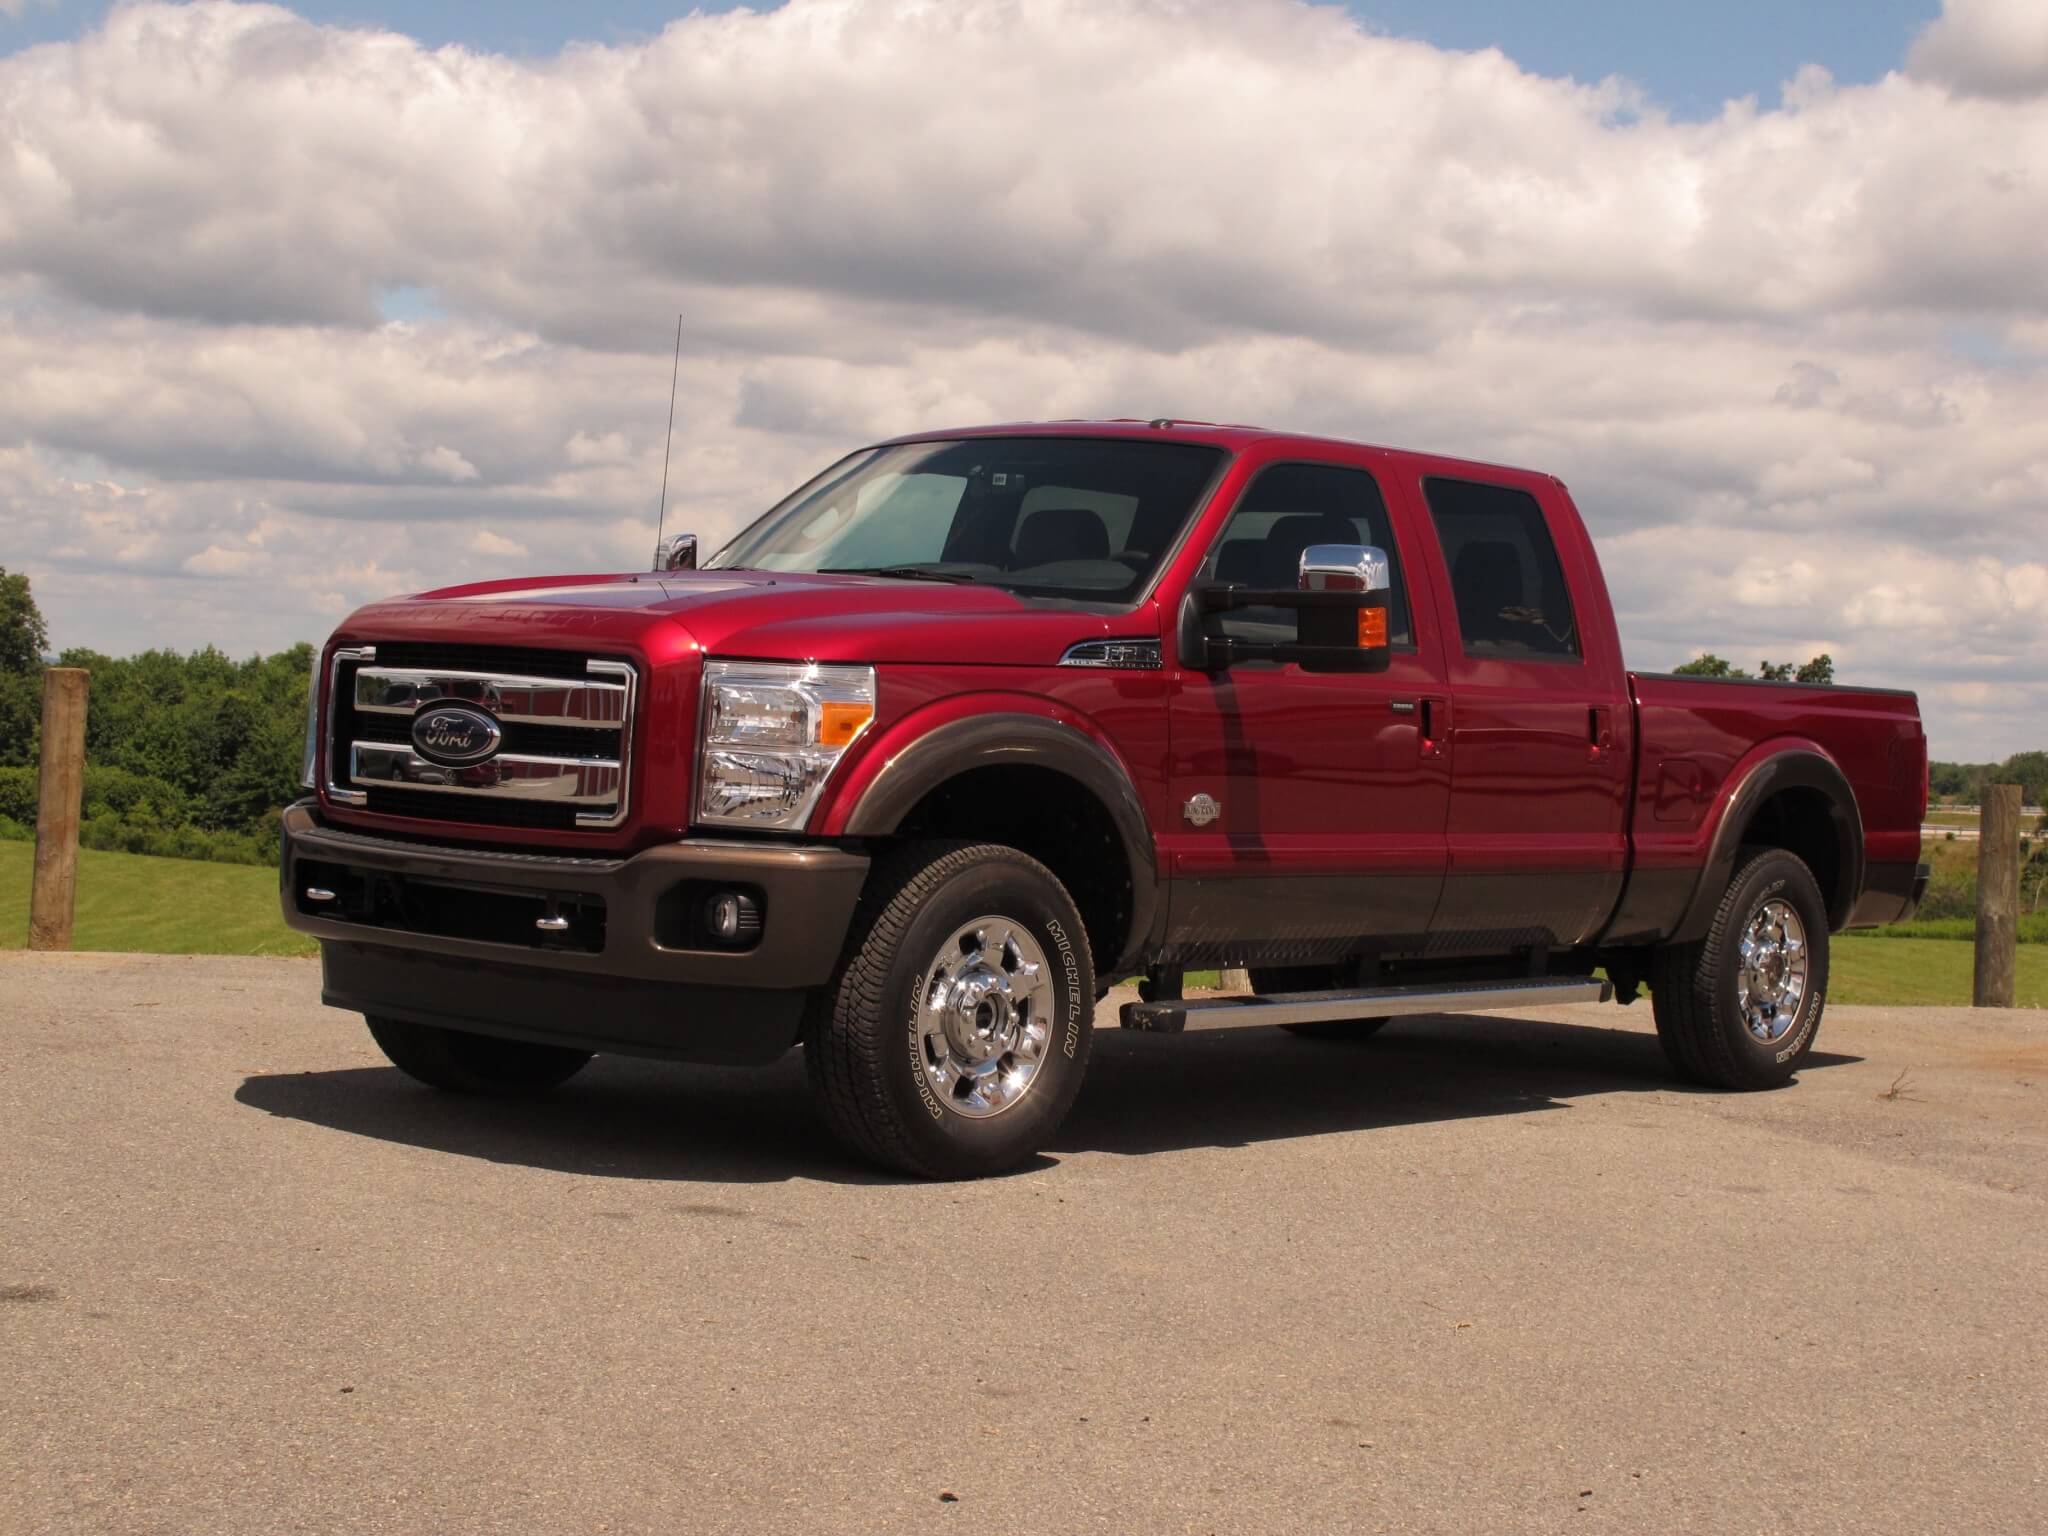 The Ford F-250 also benefits from the new upgrades to the 6.7L diesel. 